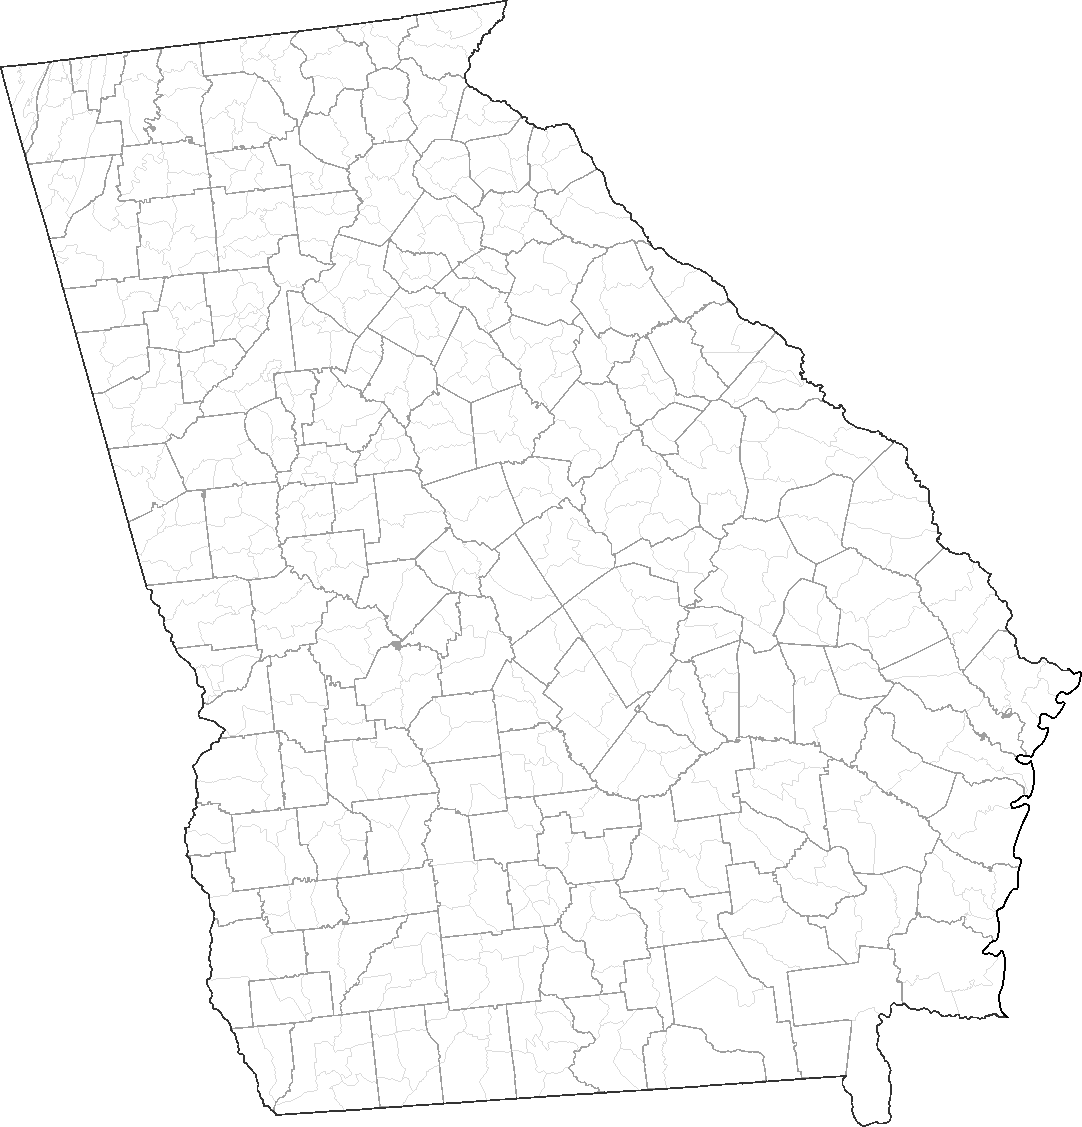 US County Subdivision - Georgia.png